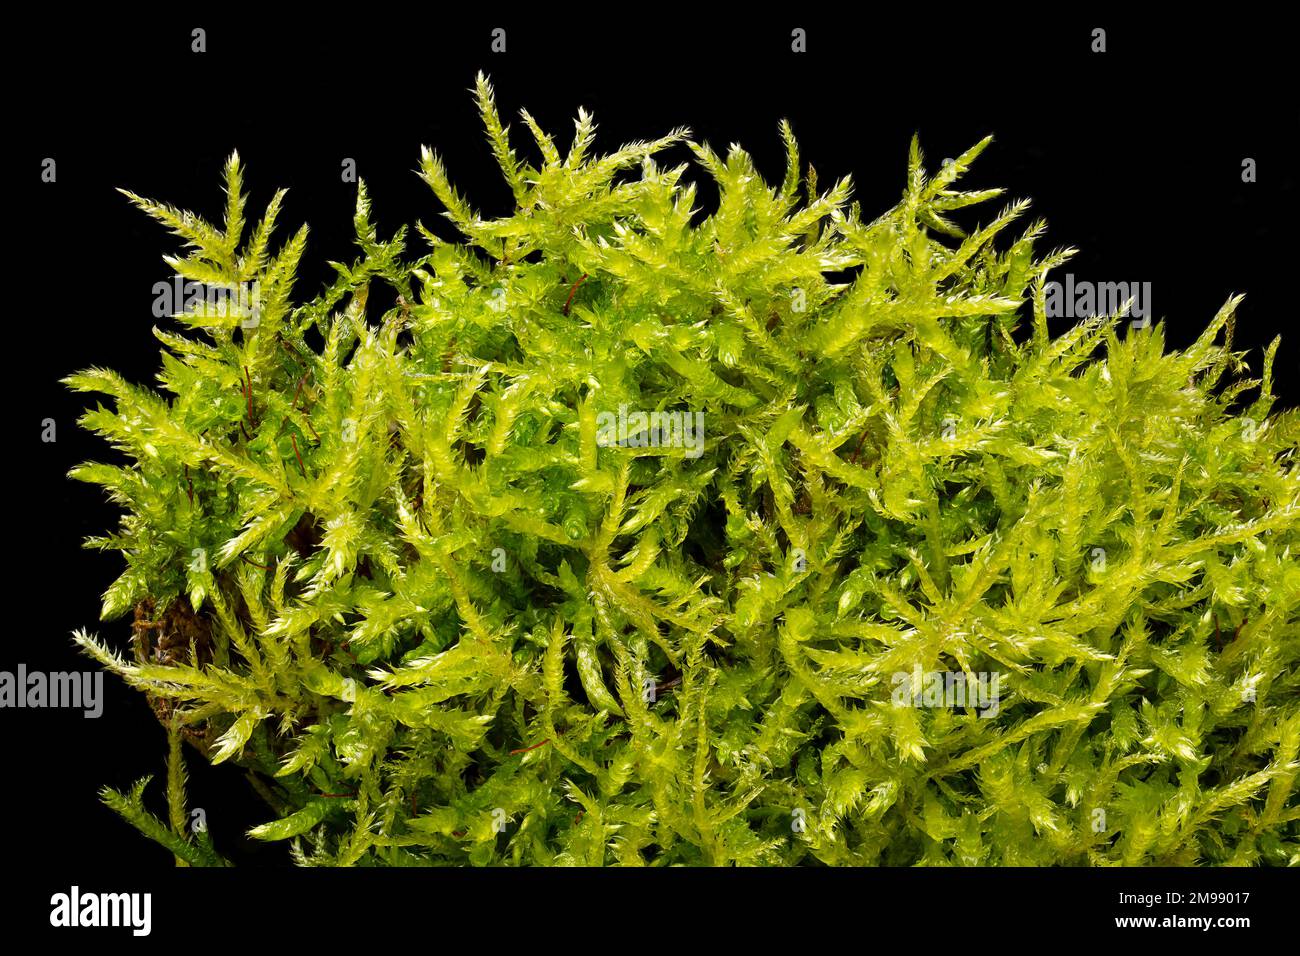 Peat moss, sphagnum moss, close-up, from above, on black background. Also known as bog or quacker moss. Decayed and dried it is used in gardening. Stock Photo